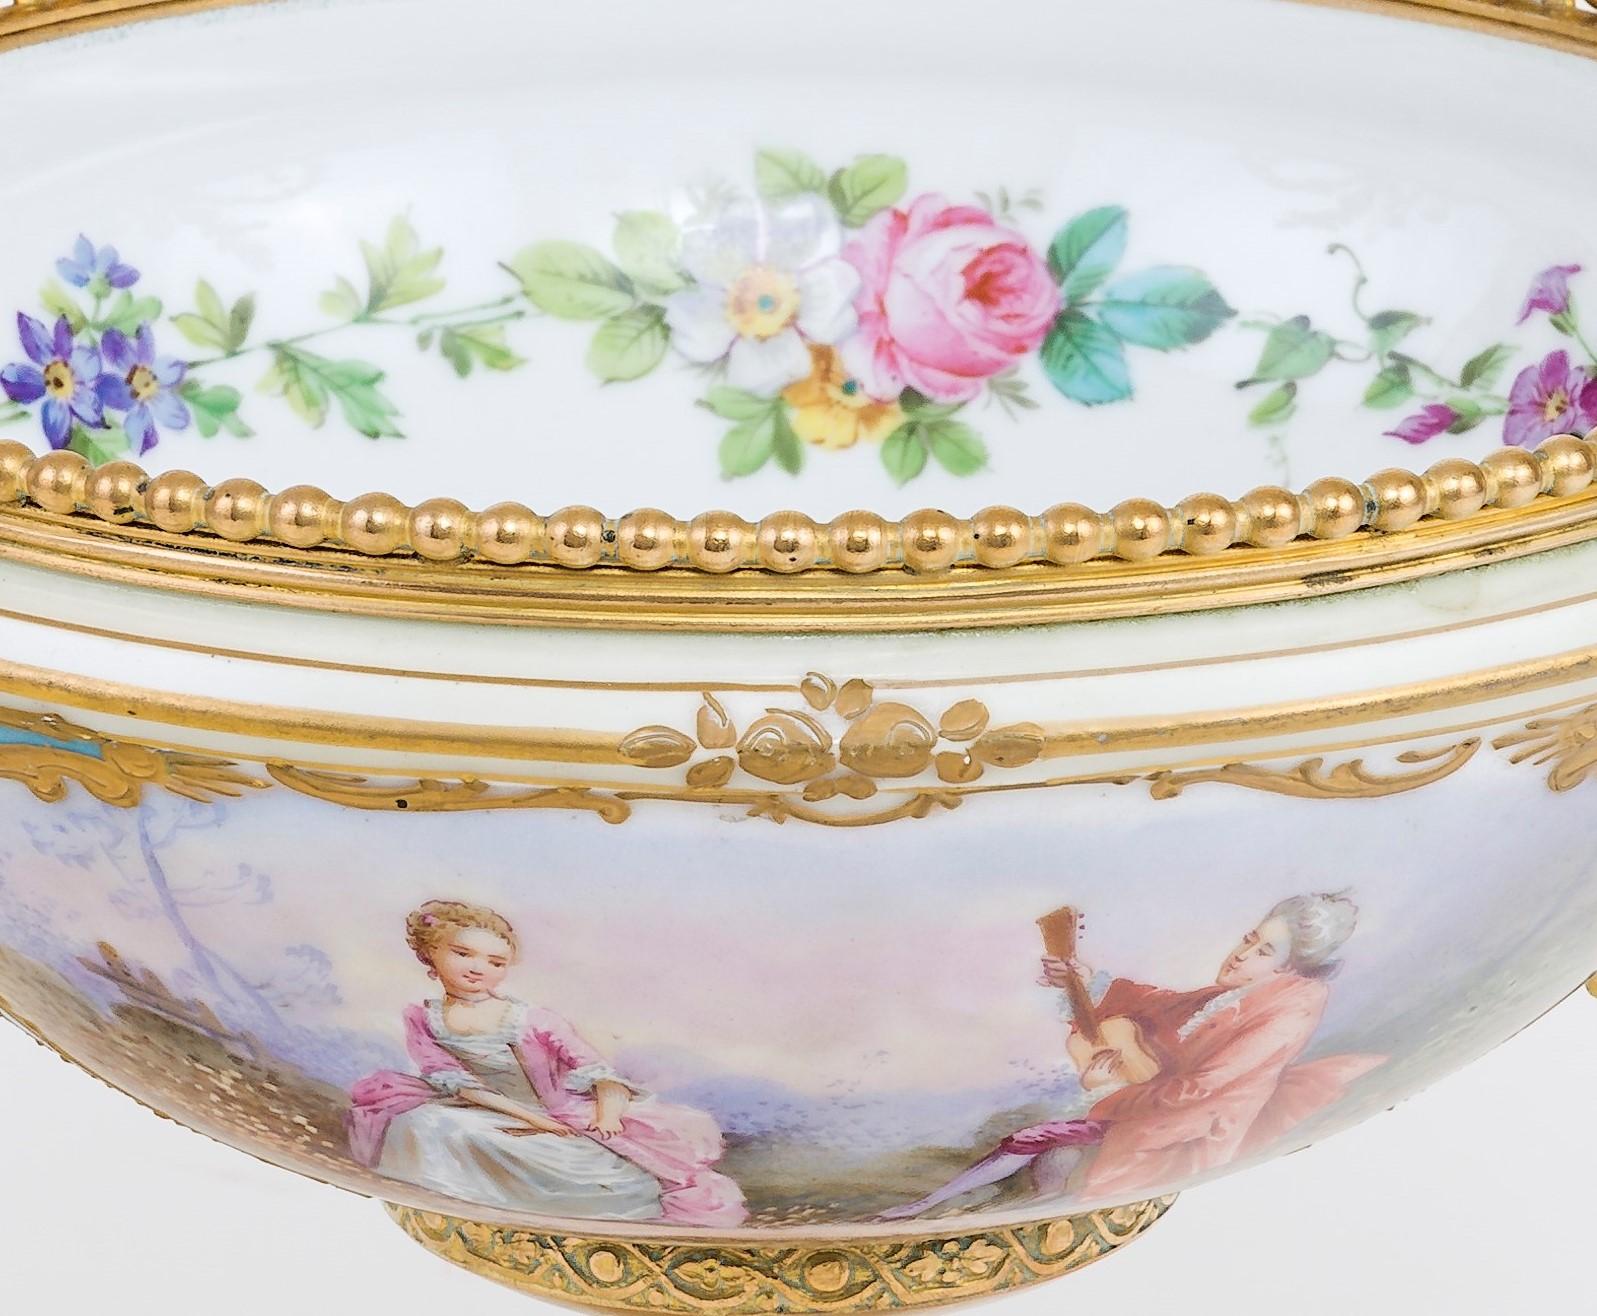 This French Sèvres Porcelain centrepiece from 1771 is set in gilt bronze mount 'ormolu'. The bowl itself displays one medallion on turquoise background with a pastoral scene of a couple in nature, the gentleman playing the guitar for the lady. This